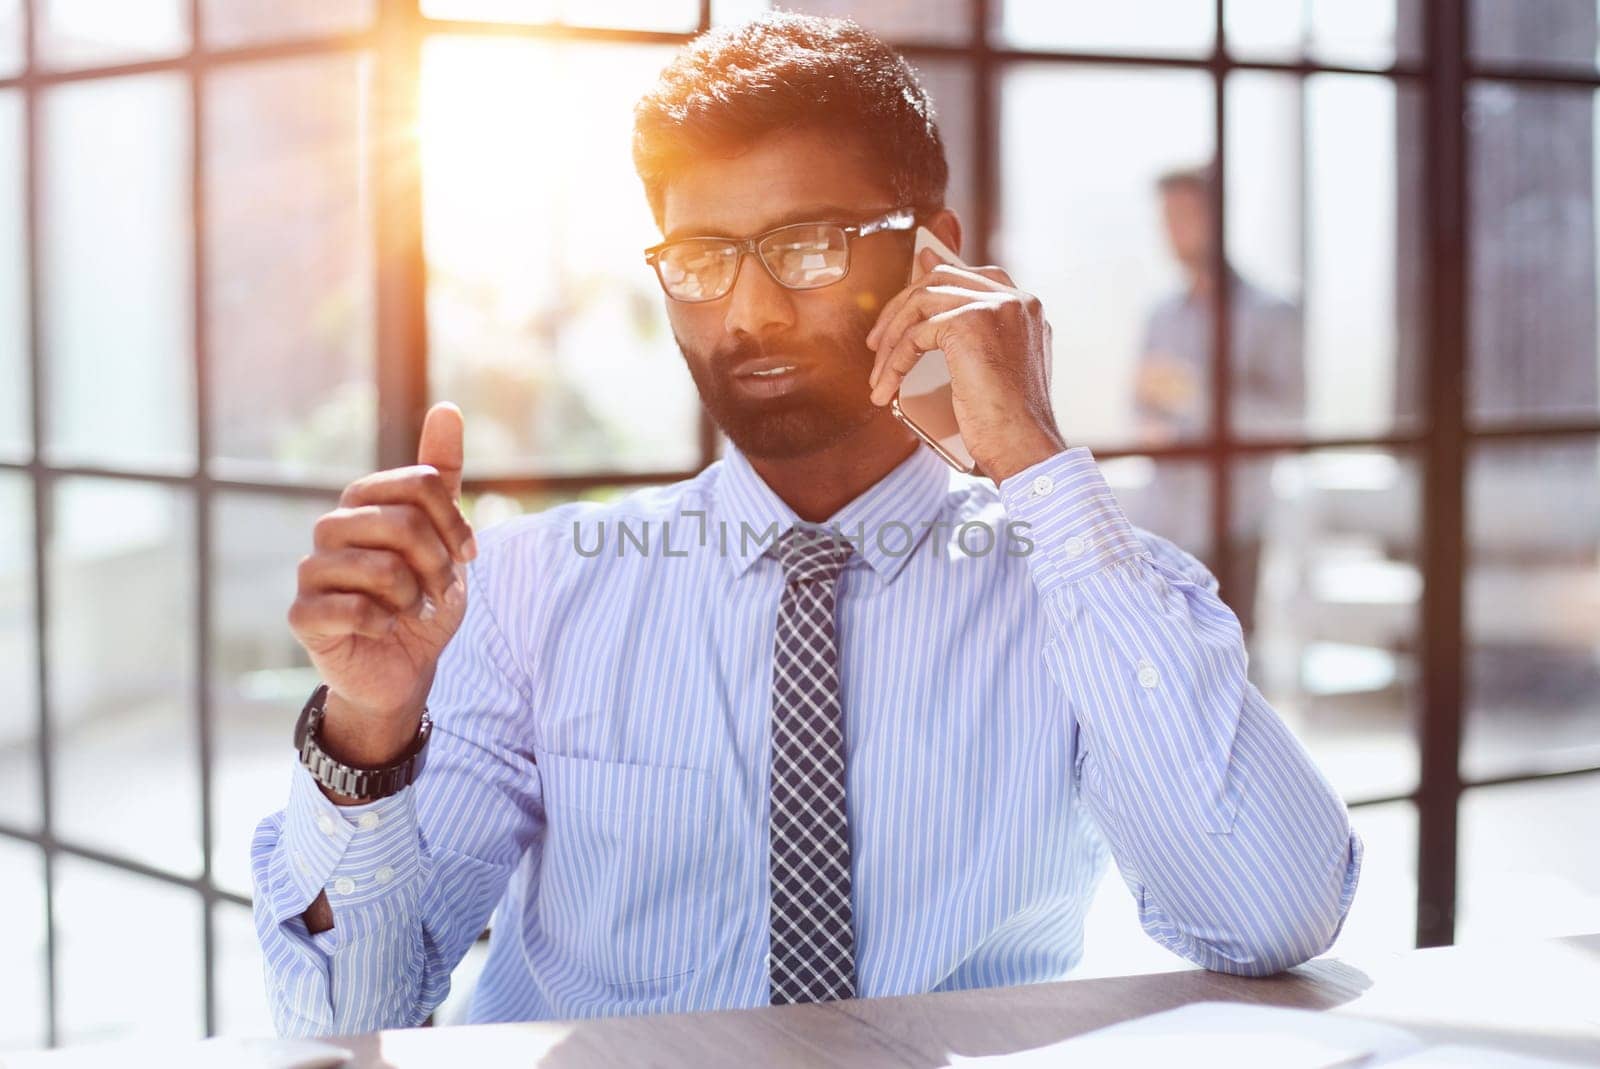 businessman sitting on chair at desk and talking on the phone